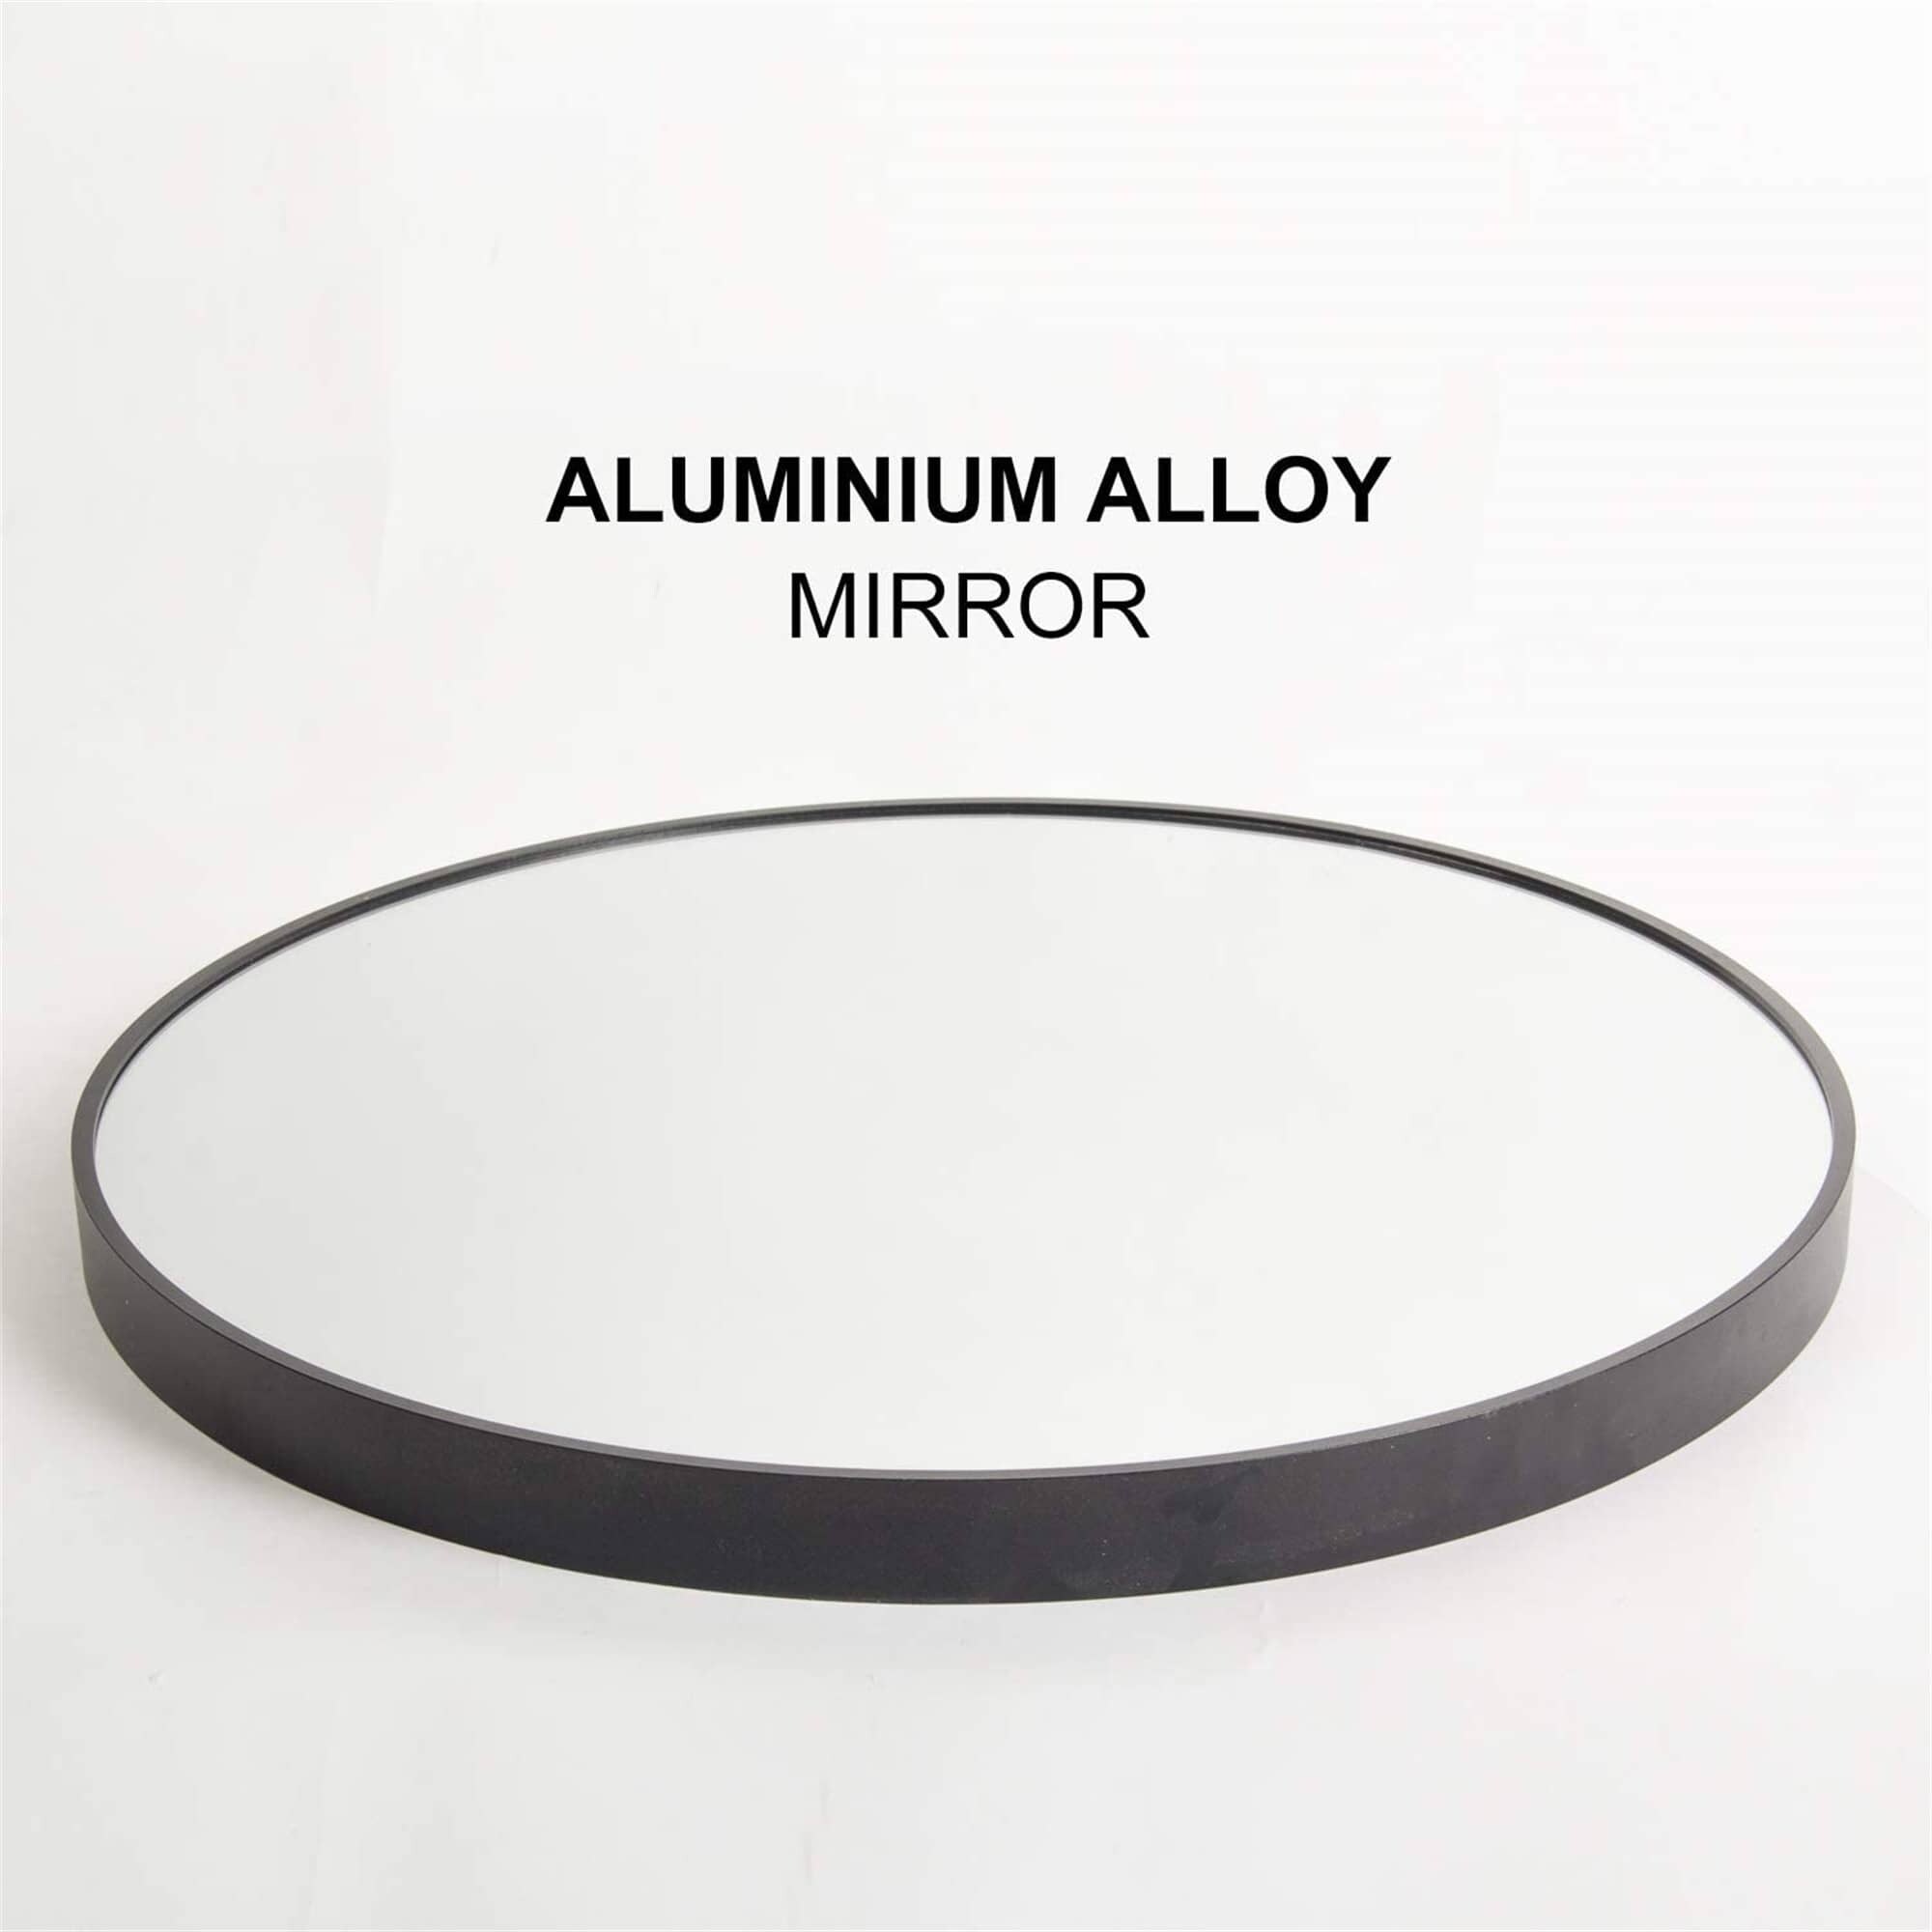 Wall Circle Mirror With Black Frame Round Modern Decoration Home Decor Mirror for Bathroom Living Room Bedroom Entryway Vanity